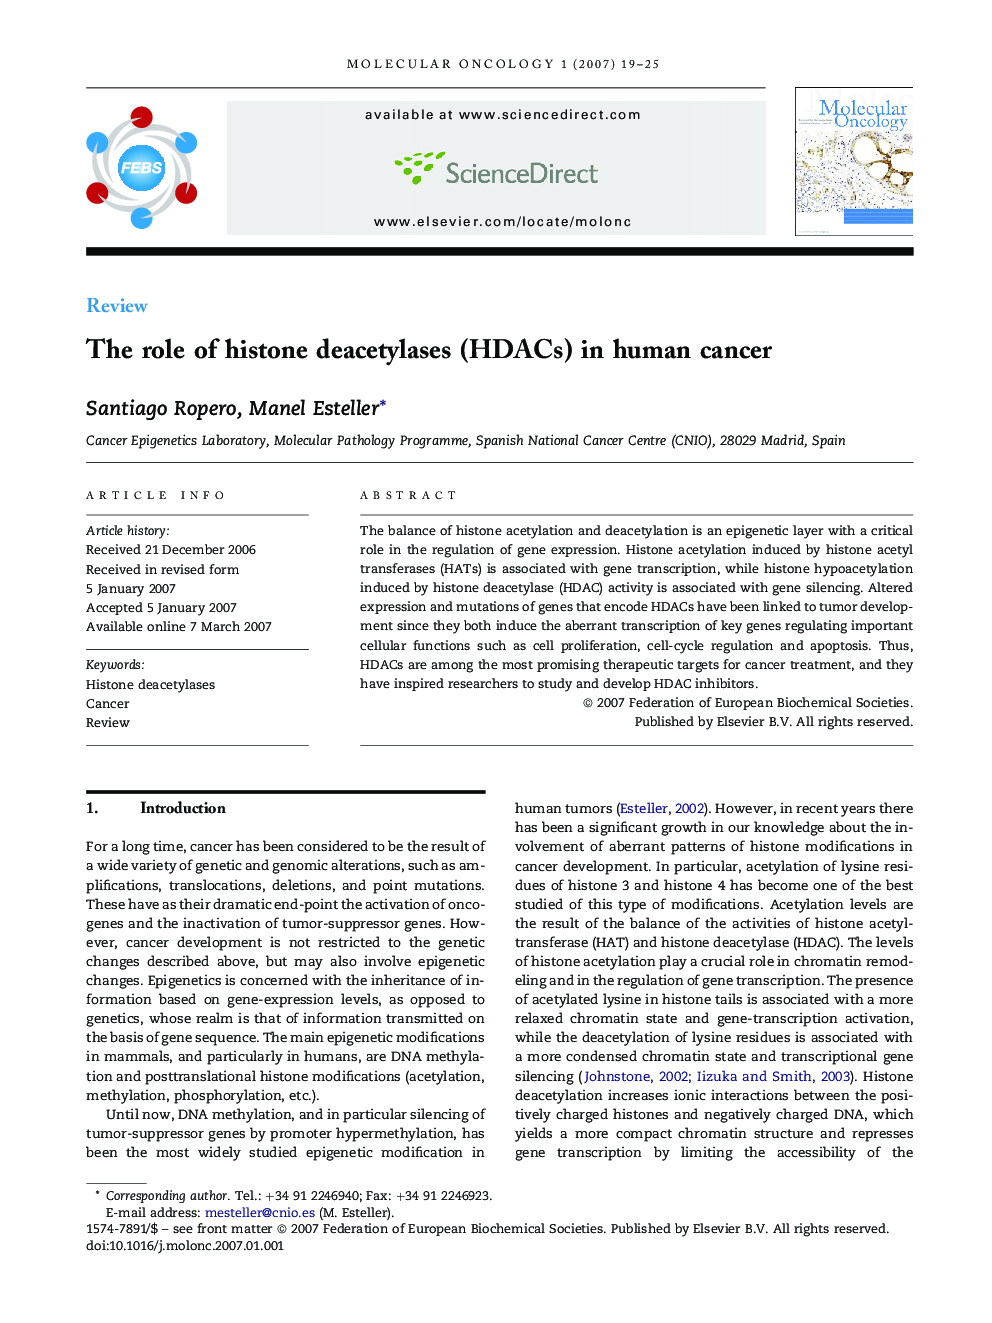 The role of histone deacetylases (HDACs) in human cancer